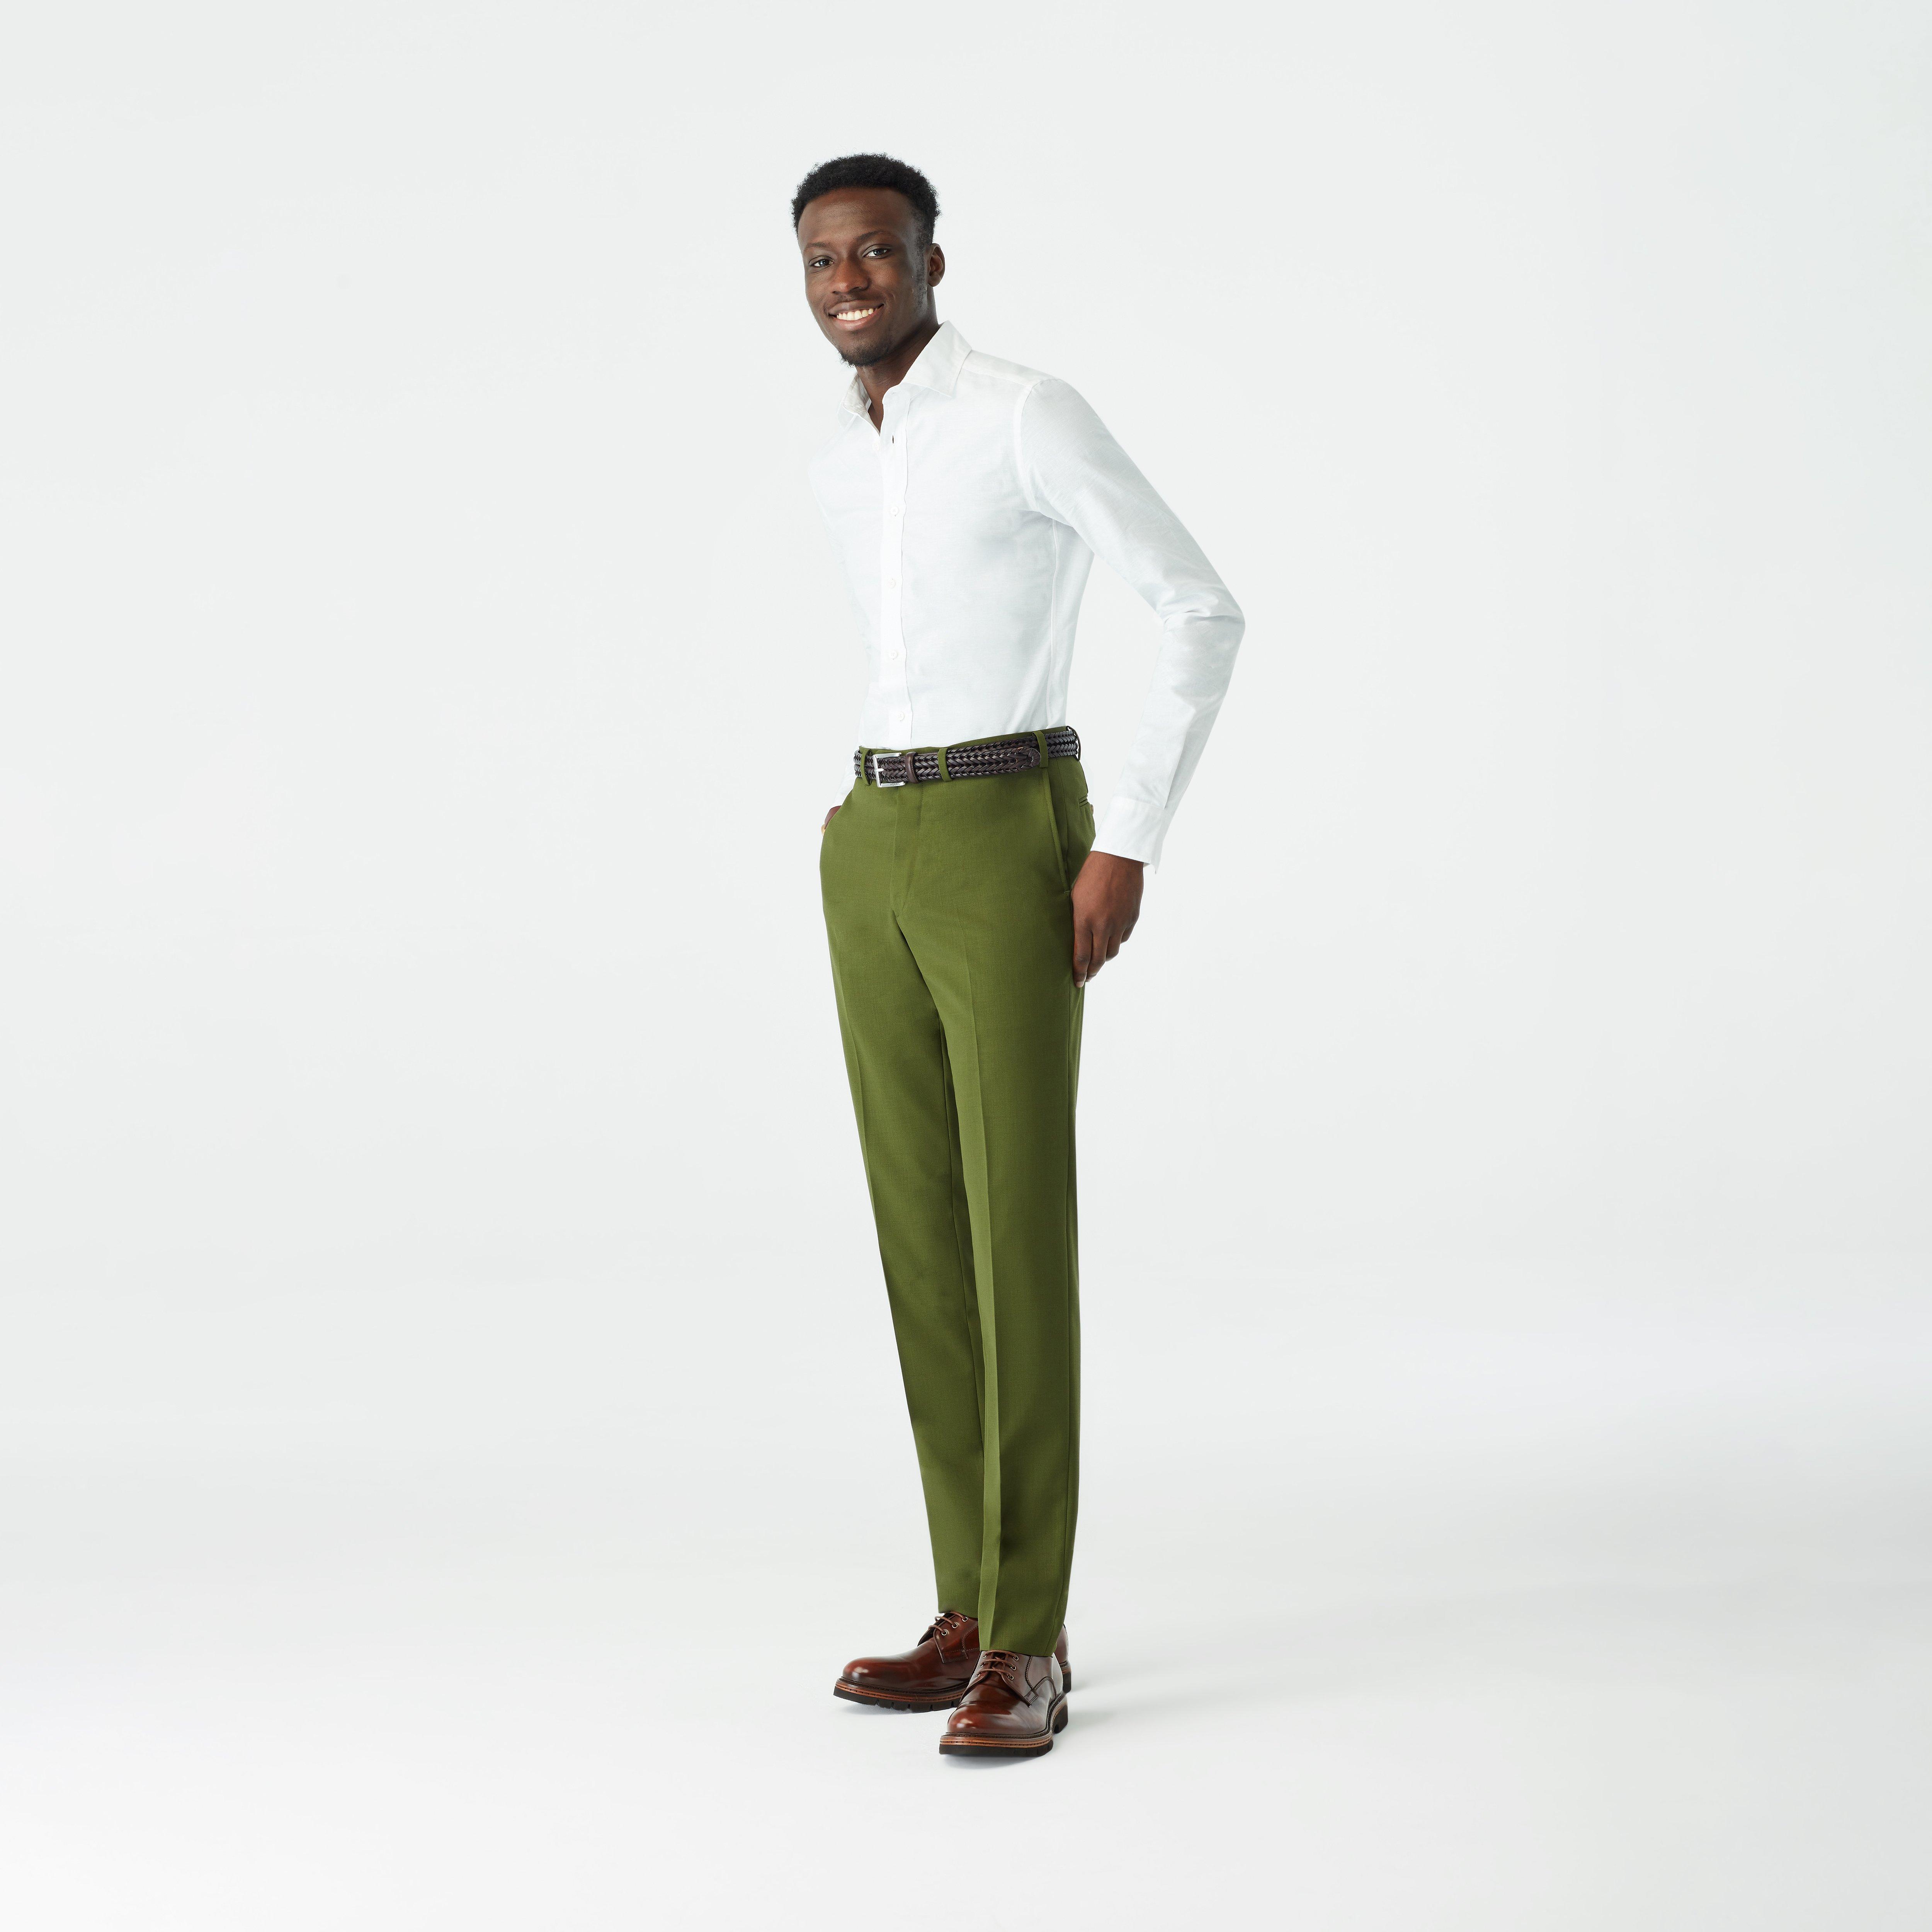 Howell Wool Stretch Olive Pants